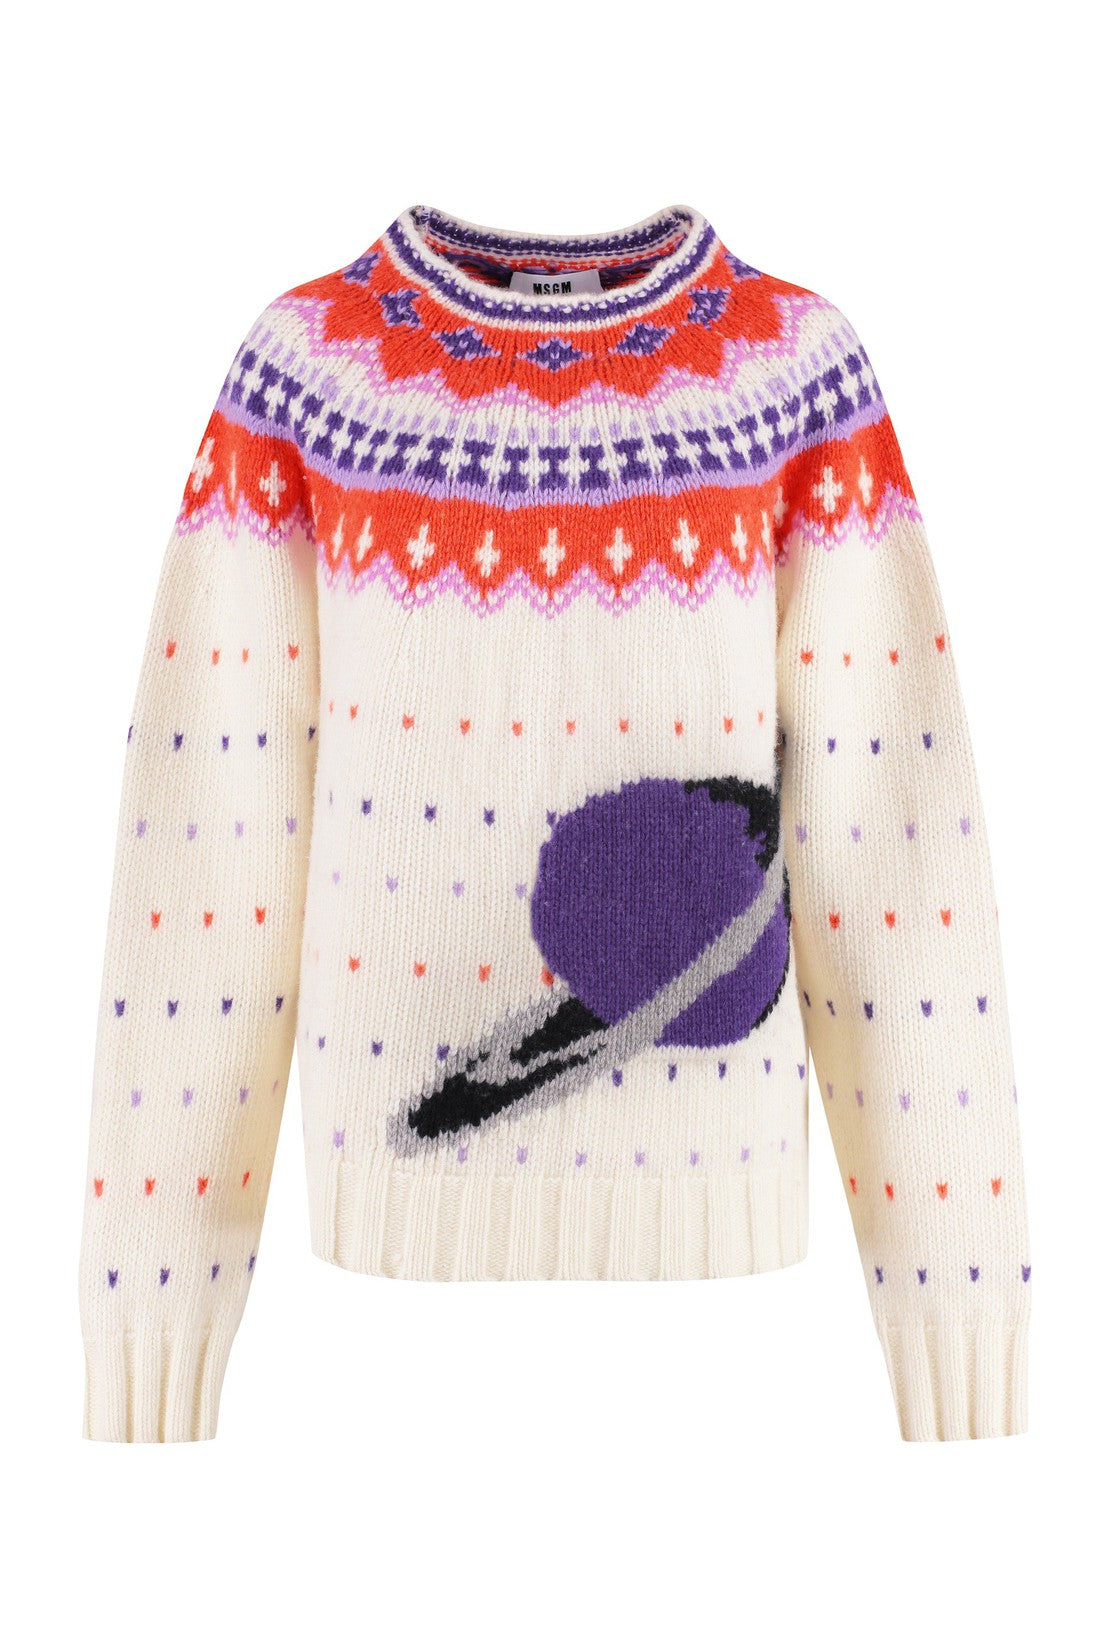 MSGM-OUTLET-SALE-Crew-neck wool sweater-ARCHIVIST